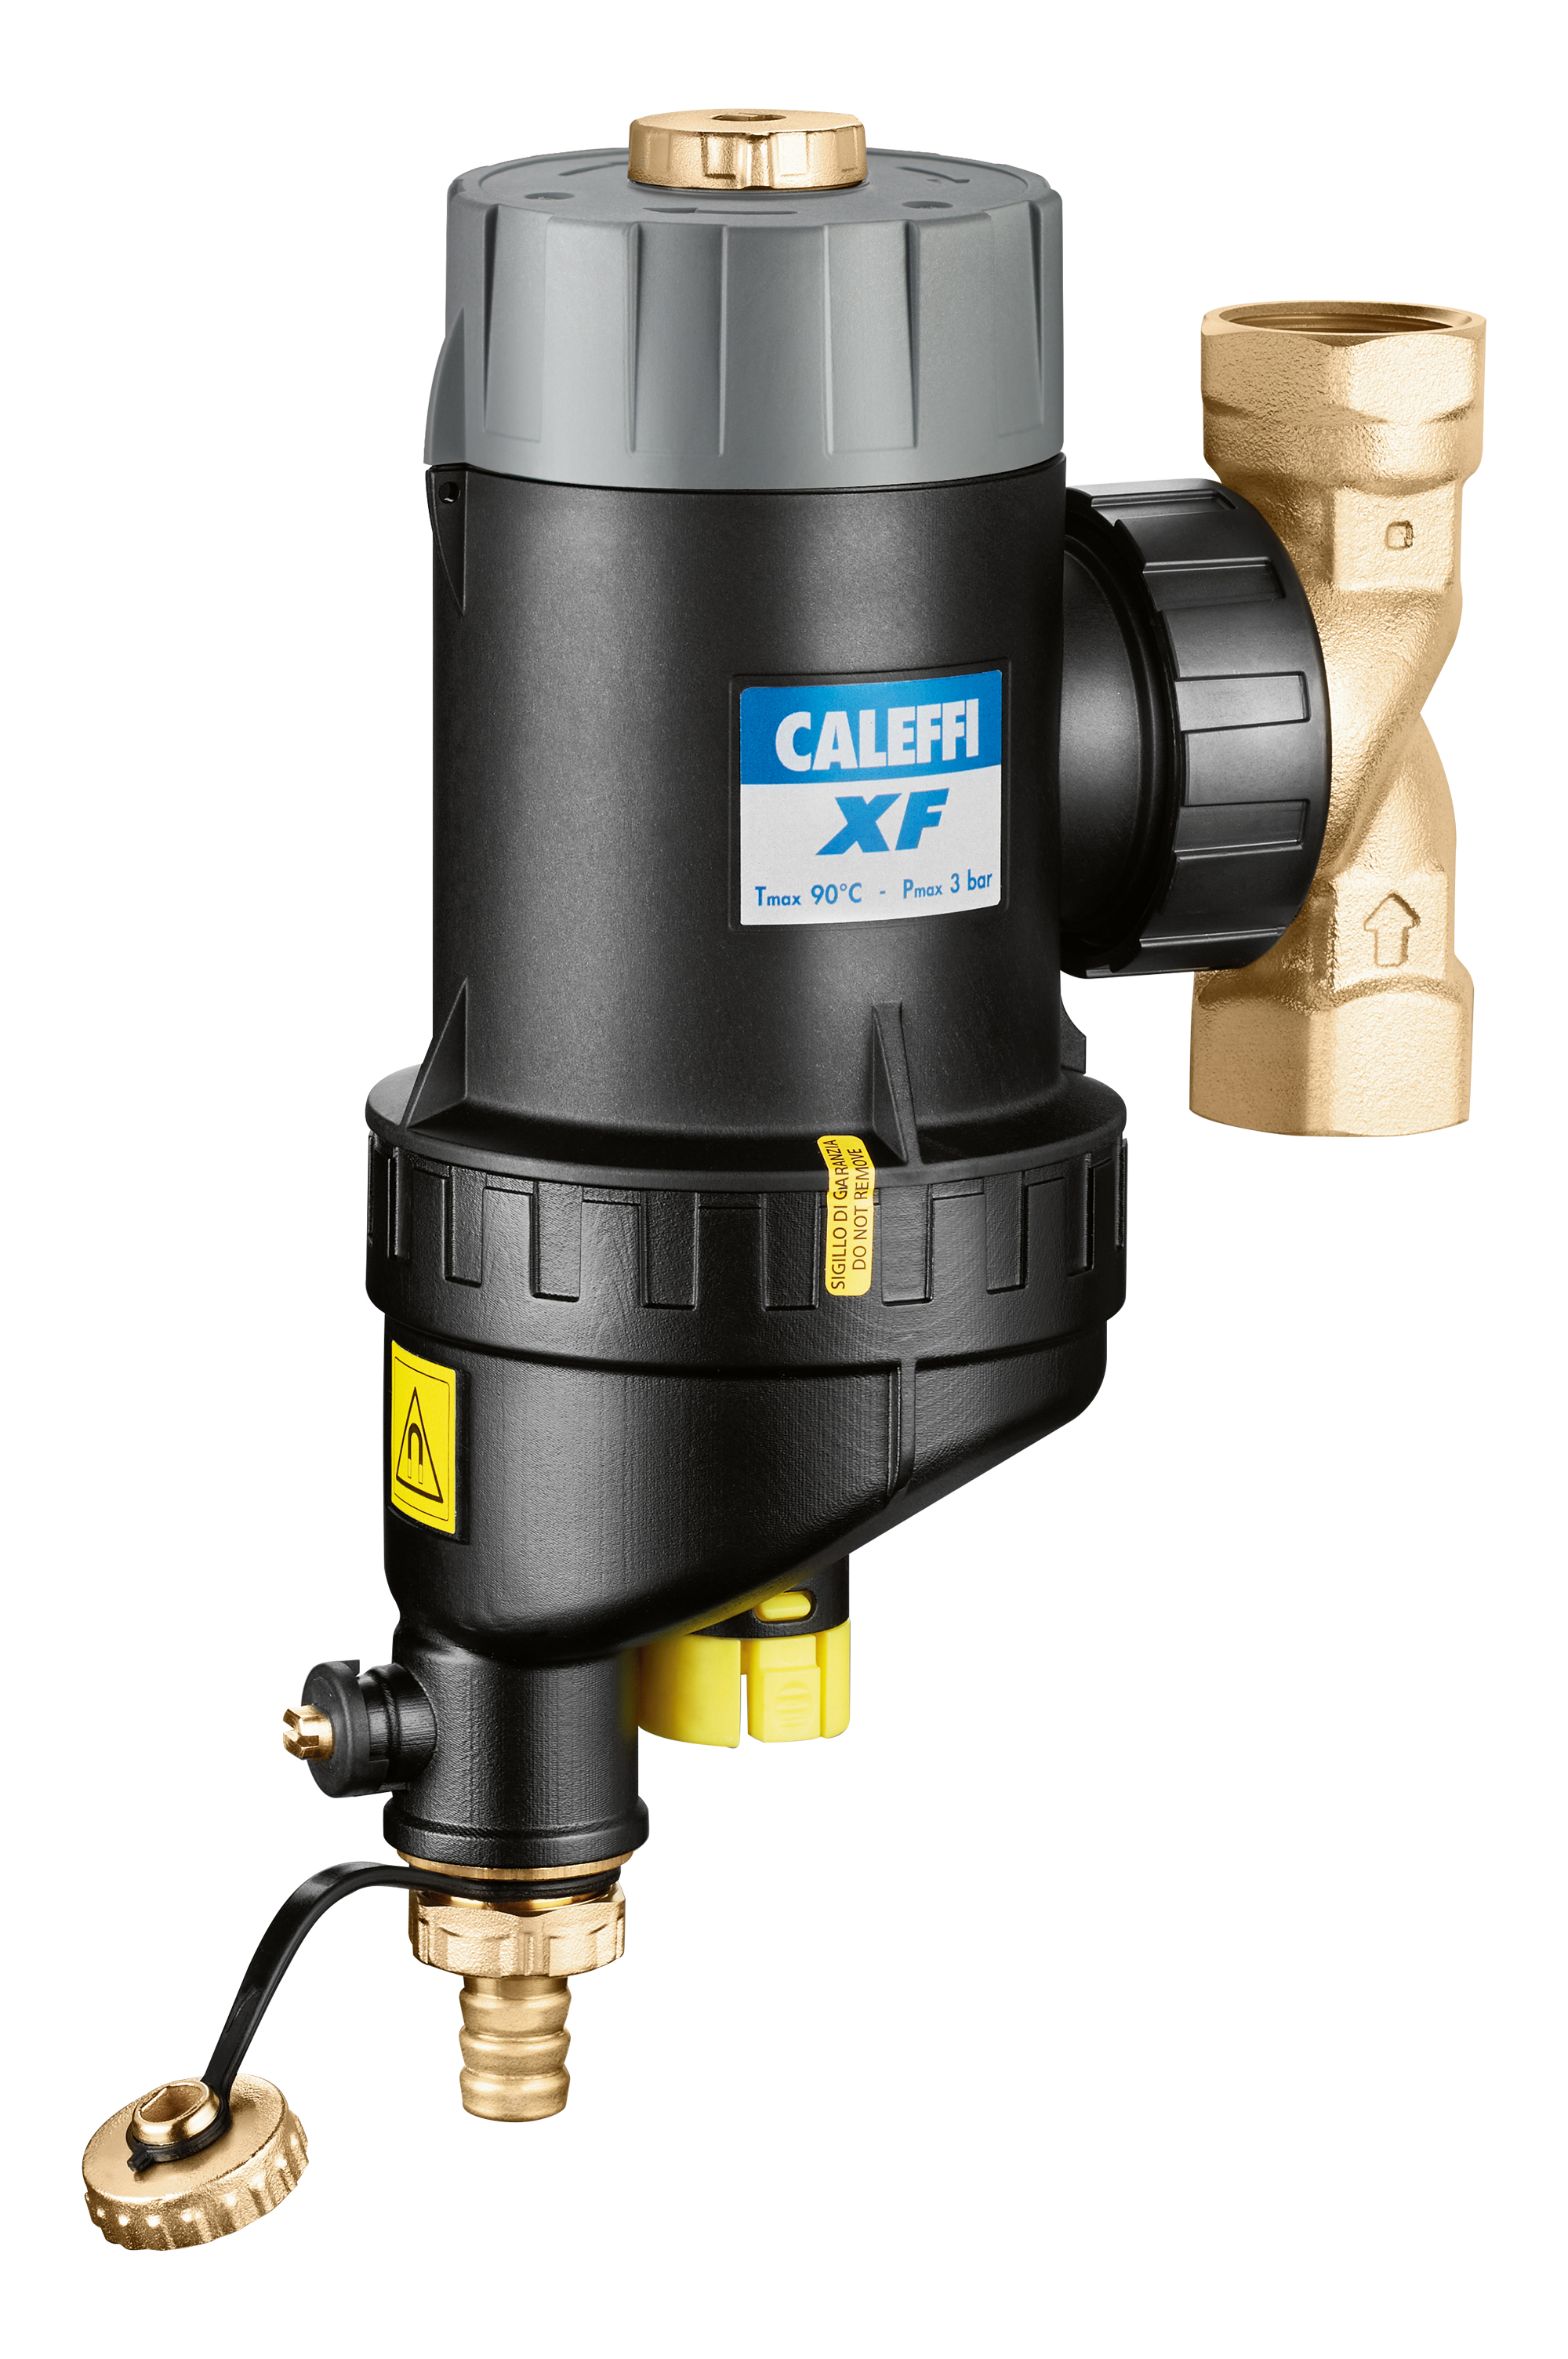 CALEFFI XF Semi-automatic self-cleaning magnetic filter (577 series) - Heat pump system, Water treatment, Caleffi S.p.A.